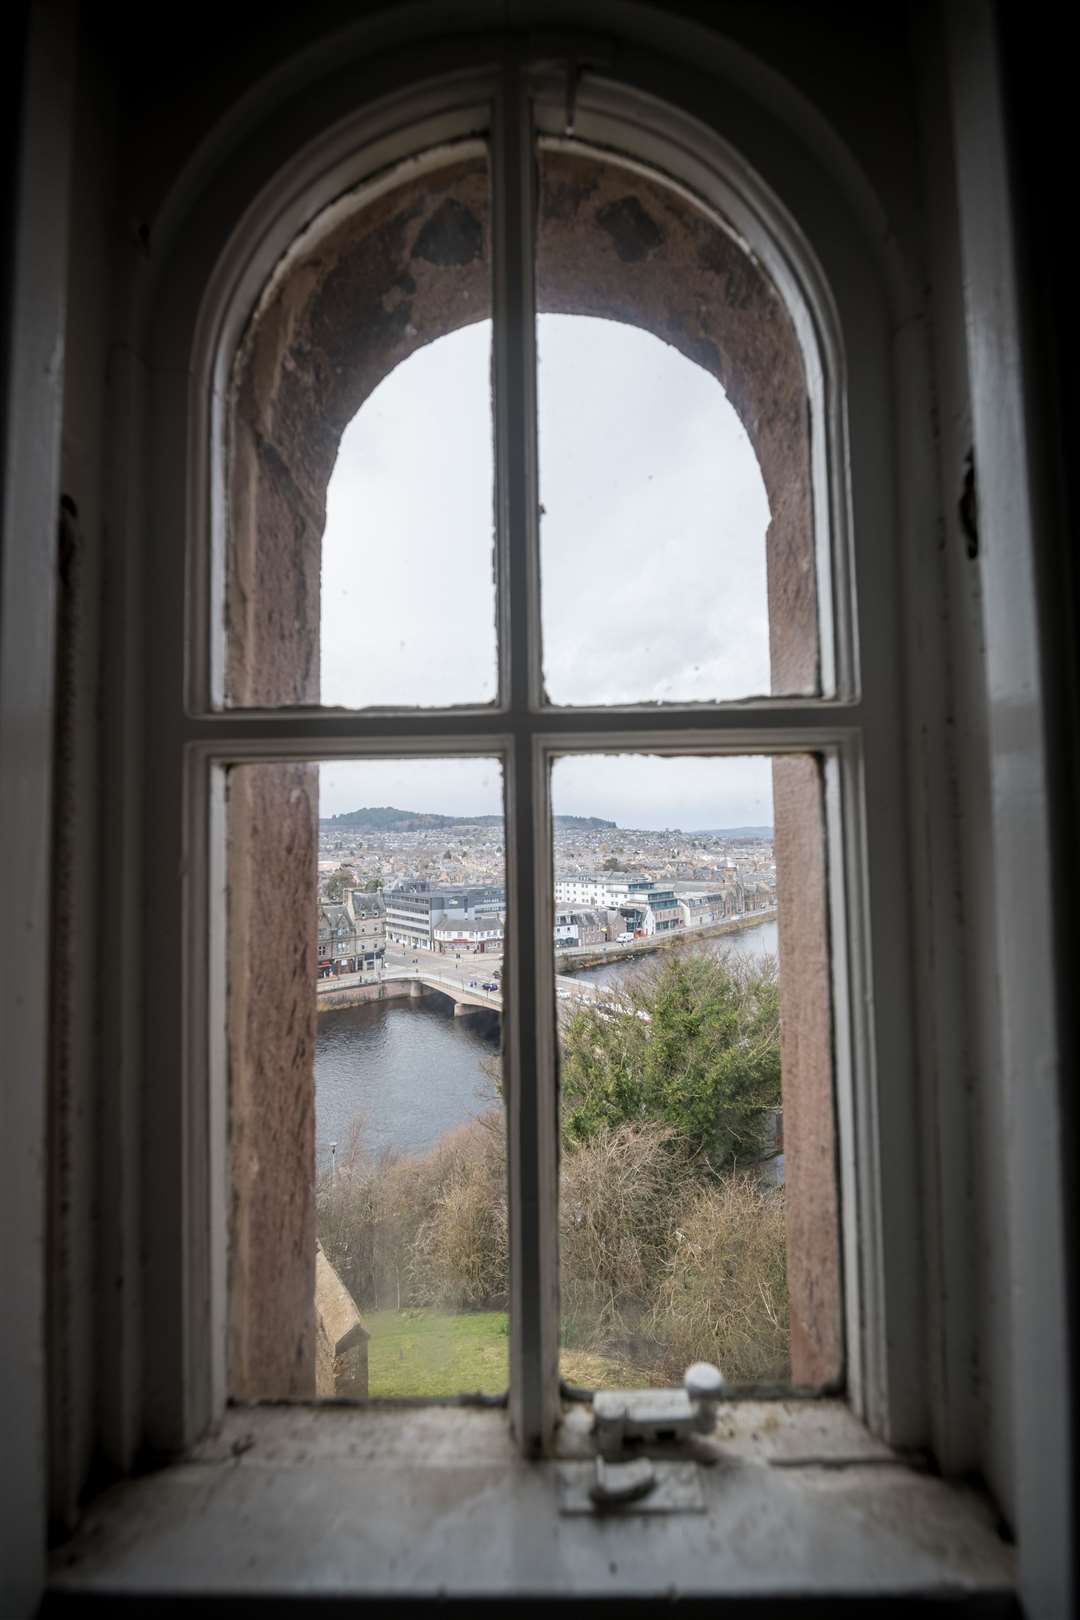 The view from one of the castle windows overlooking the River Ness.